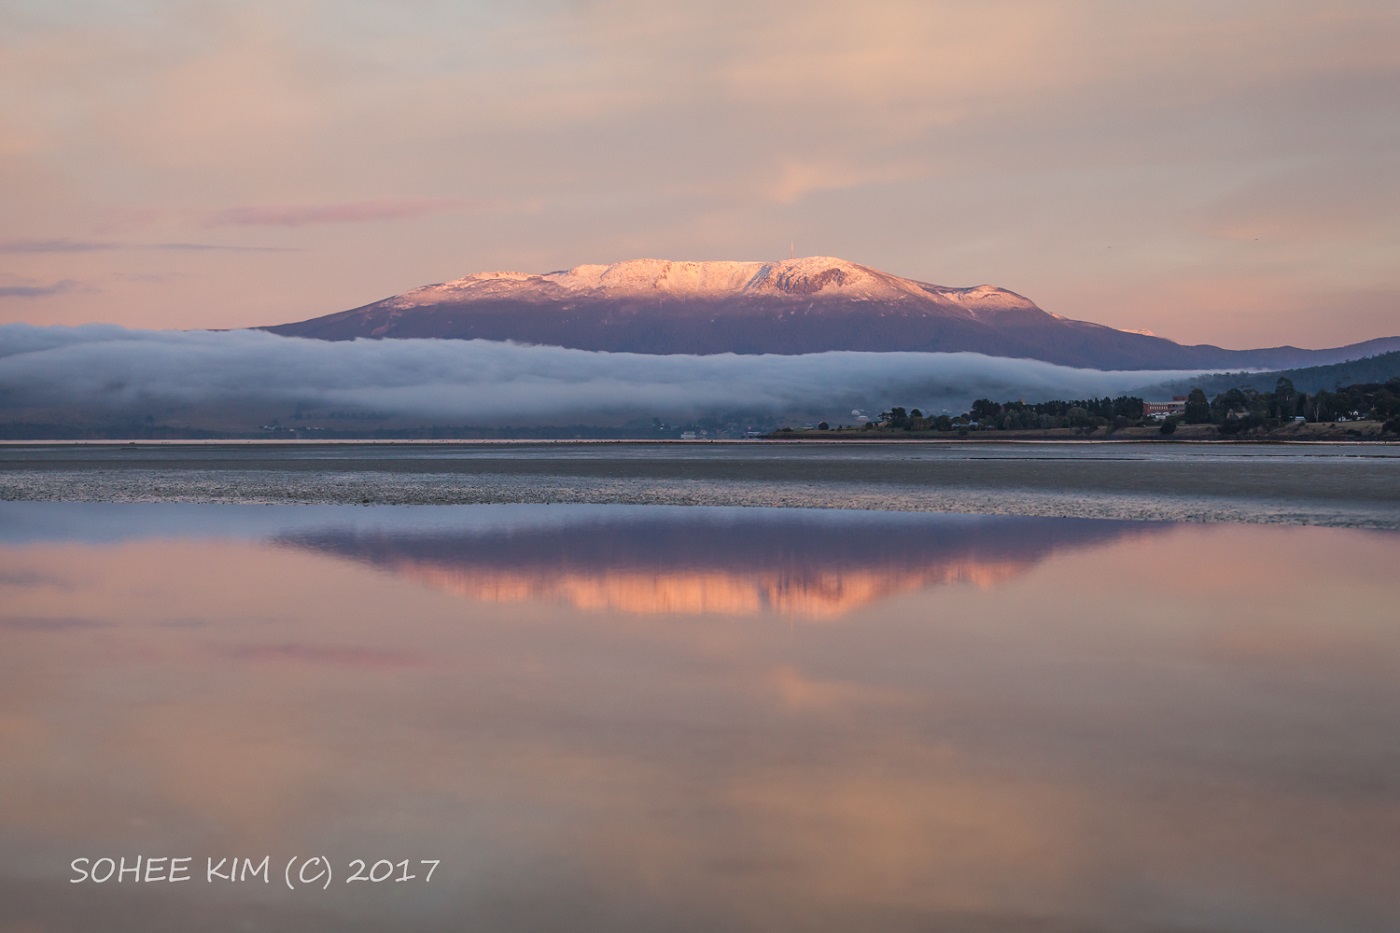 Softly-lit Derwent river in the foreground with a thick blanket of fog and Mt Wellington rising above it.